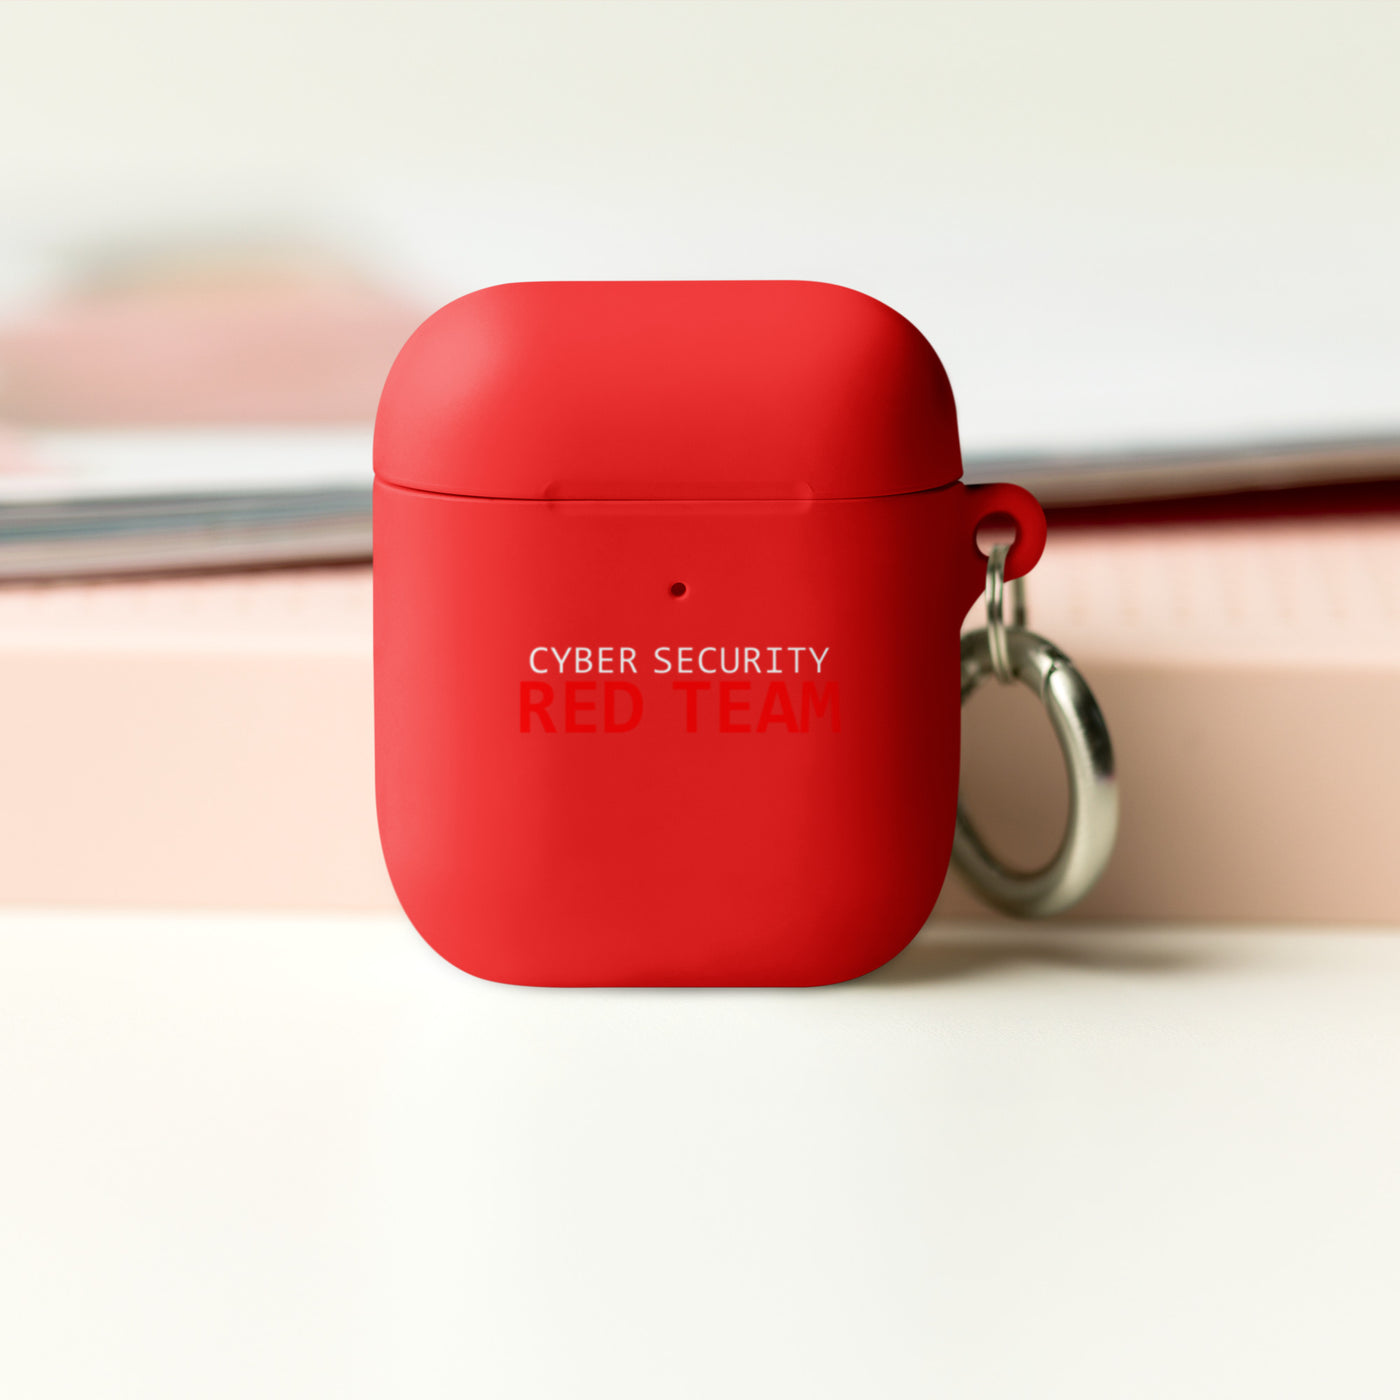 Cyber security Red Team - AirPods case